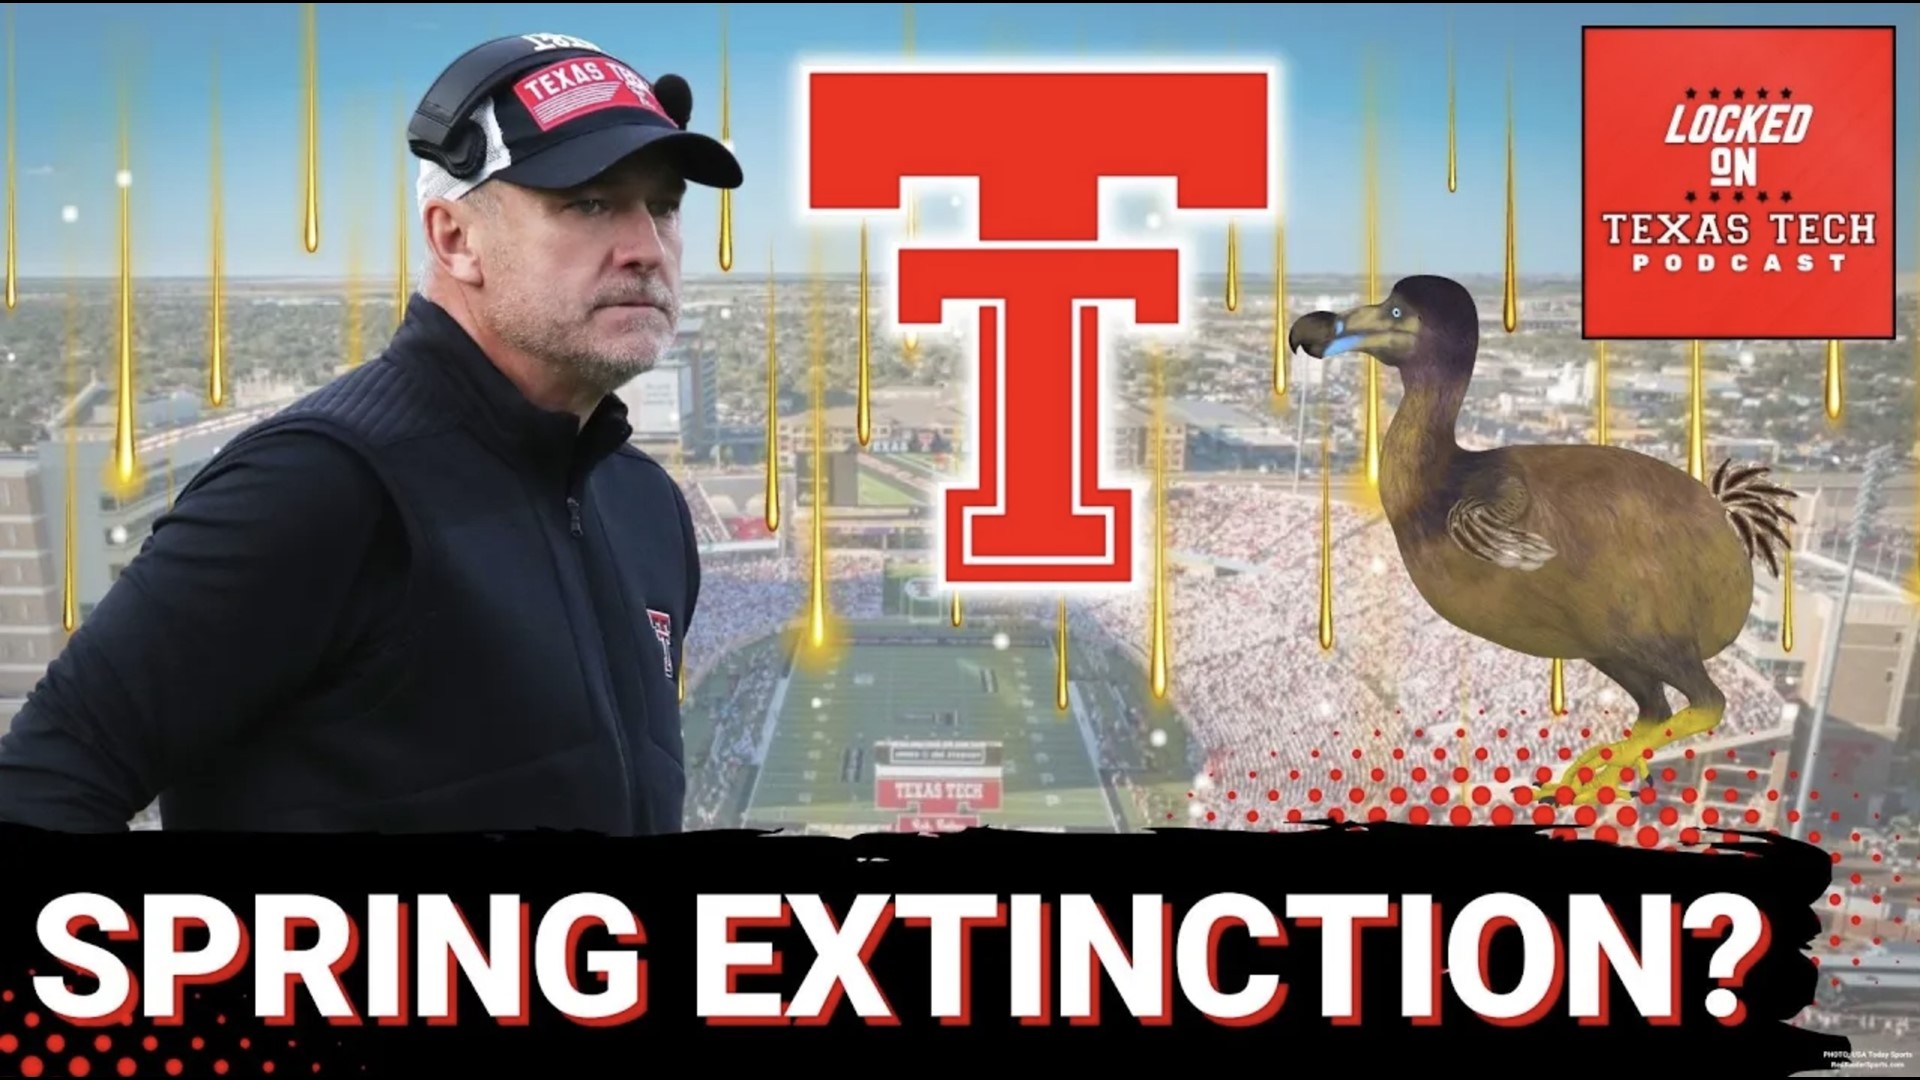 Today from Lubbock, TX, on Locked On Texas Tech:

- no spring game
- will there ever be another?
- another portal entry